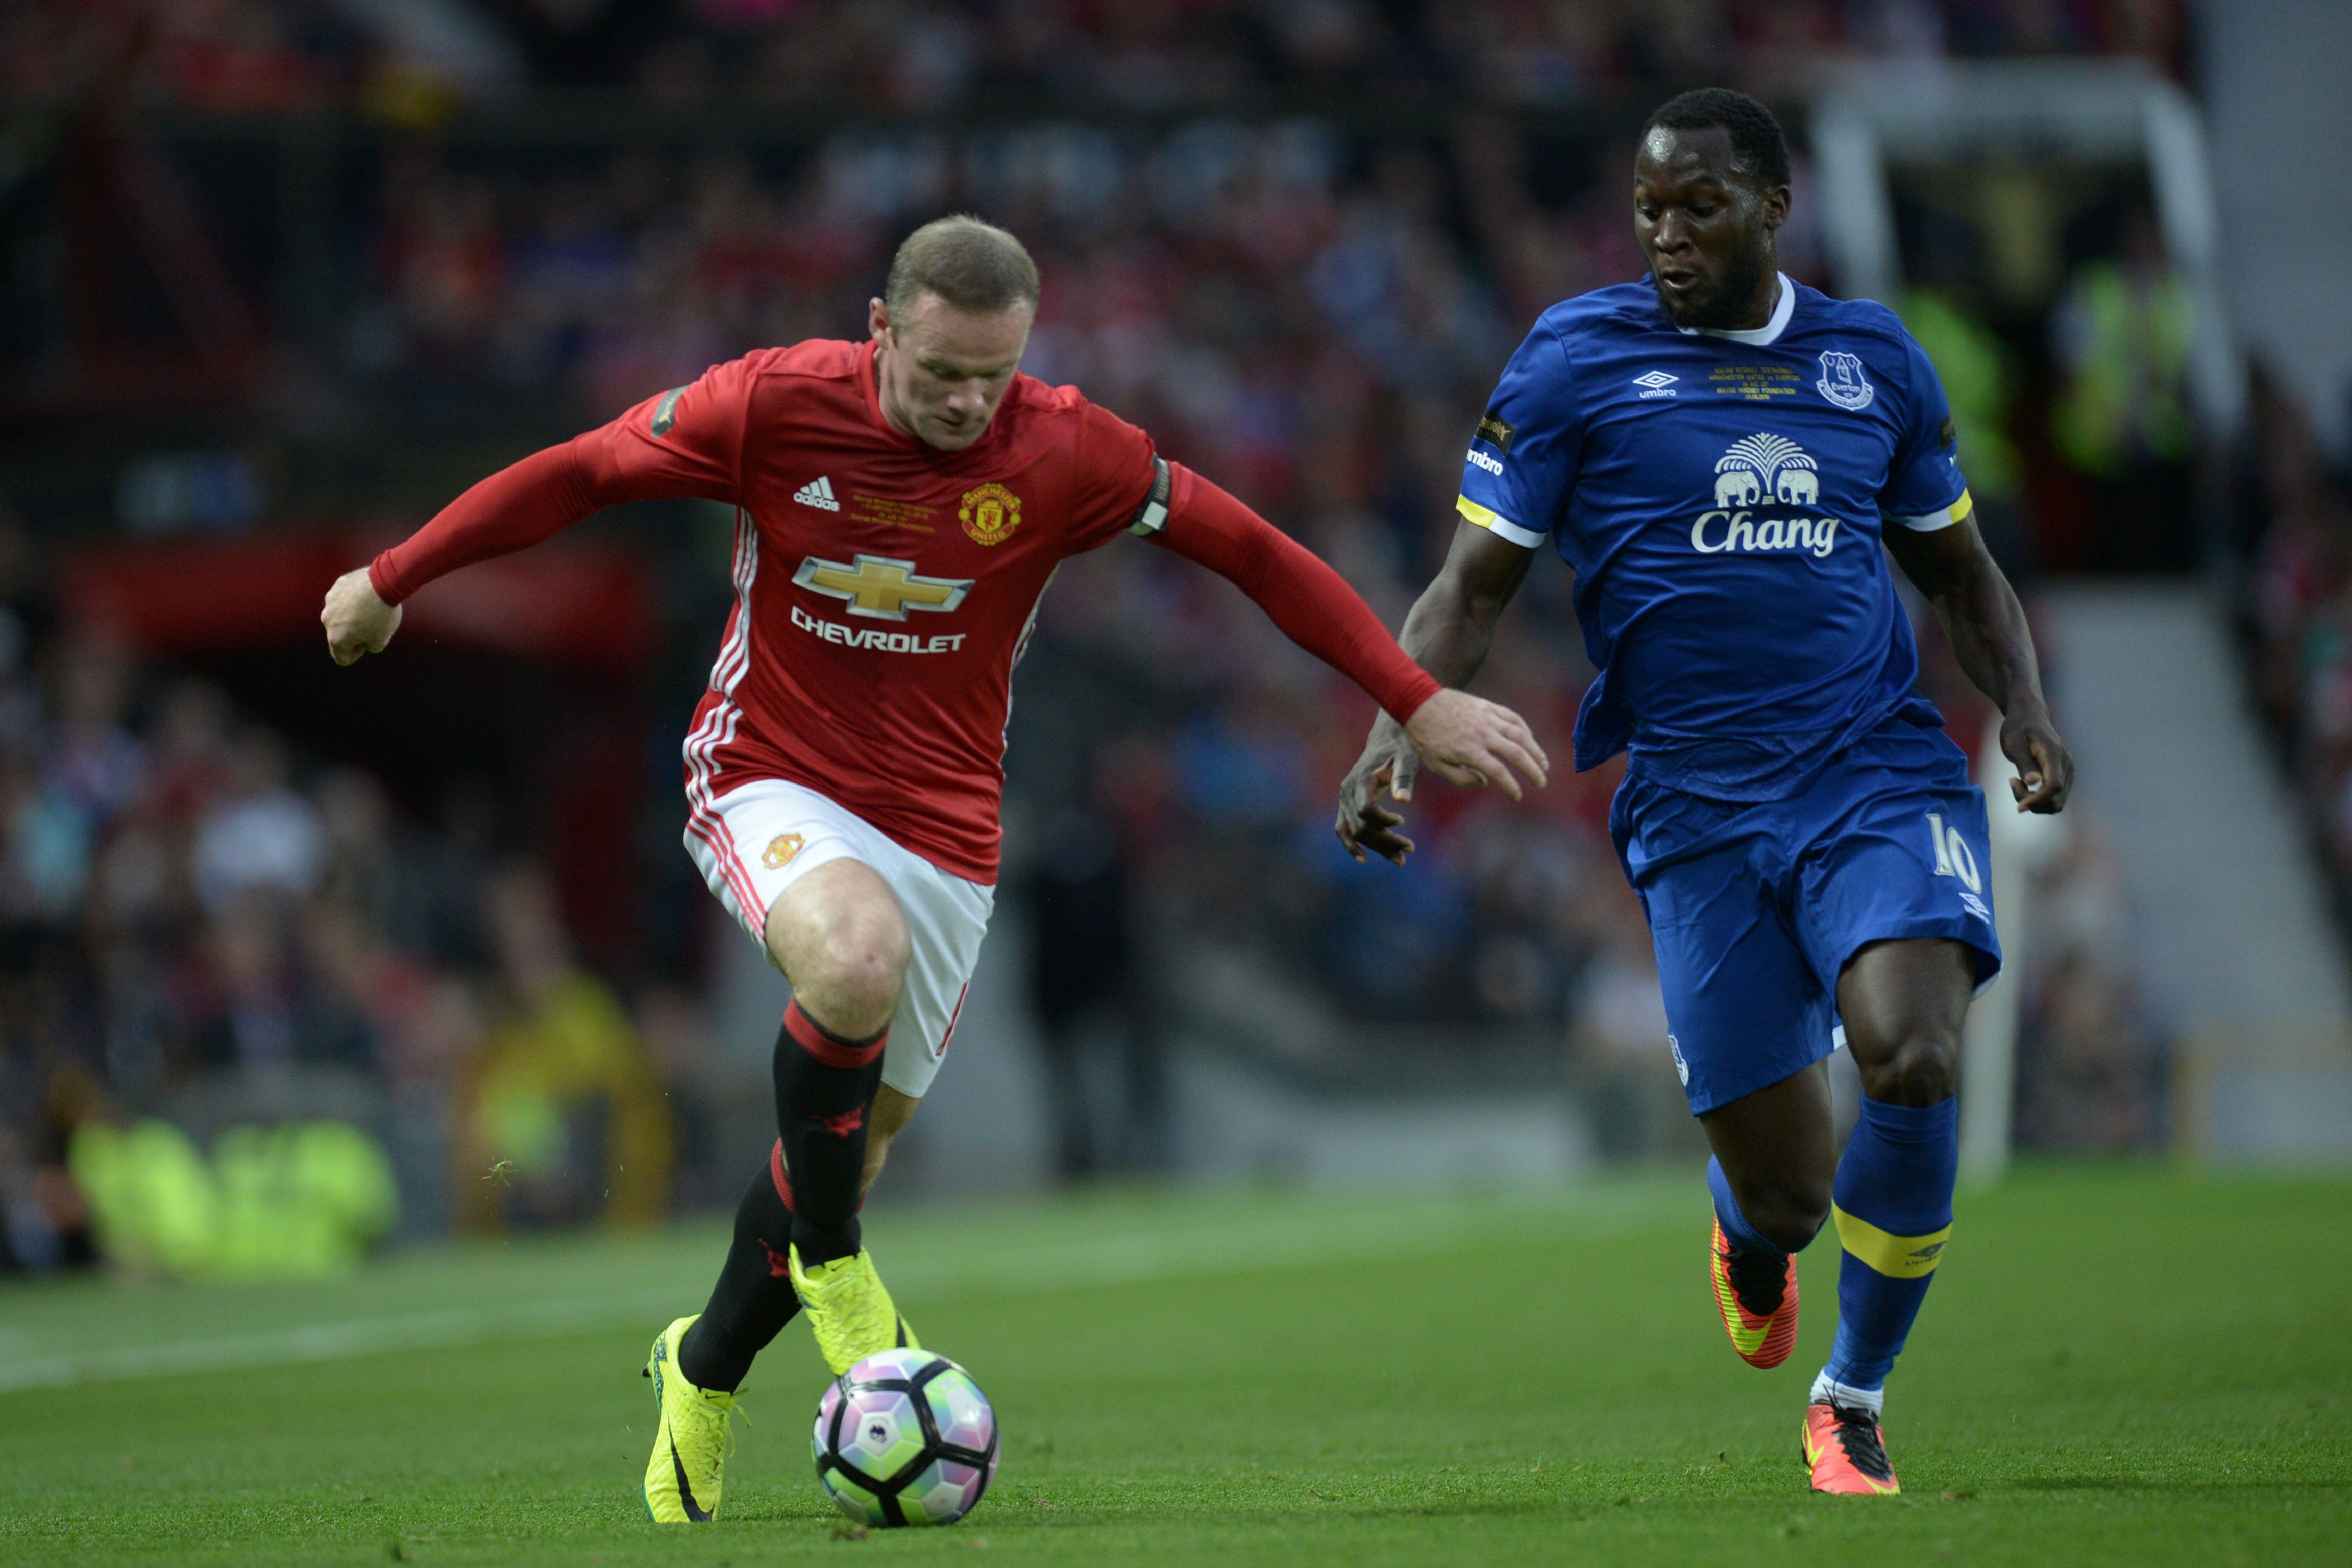 Manchester United's English striker Wayne Rooney (L) runs with the ball challenged by Everton's Belgian striker Romelu Lukaku (R) during the friendly Wayne Rooney testimonial football match between Manchester United and Everton at Old Trafford in Manchester, northwest England, on August 3, 2016.  / AFP / OLI SCARFF        (Photo credit should read OLI SCARFF/AFP/Getty Images)